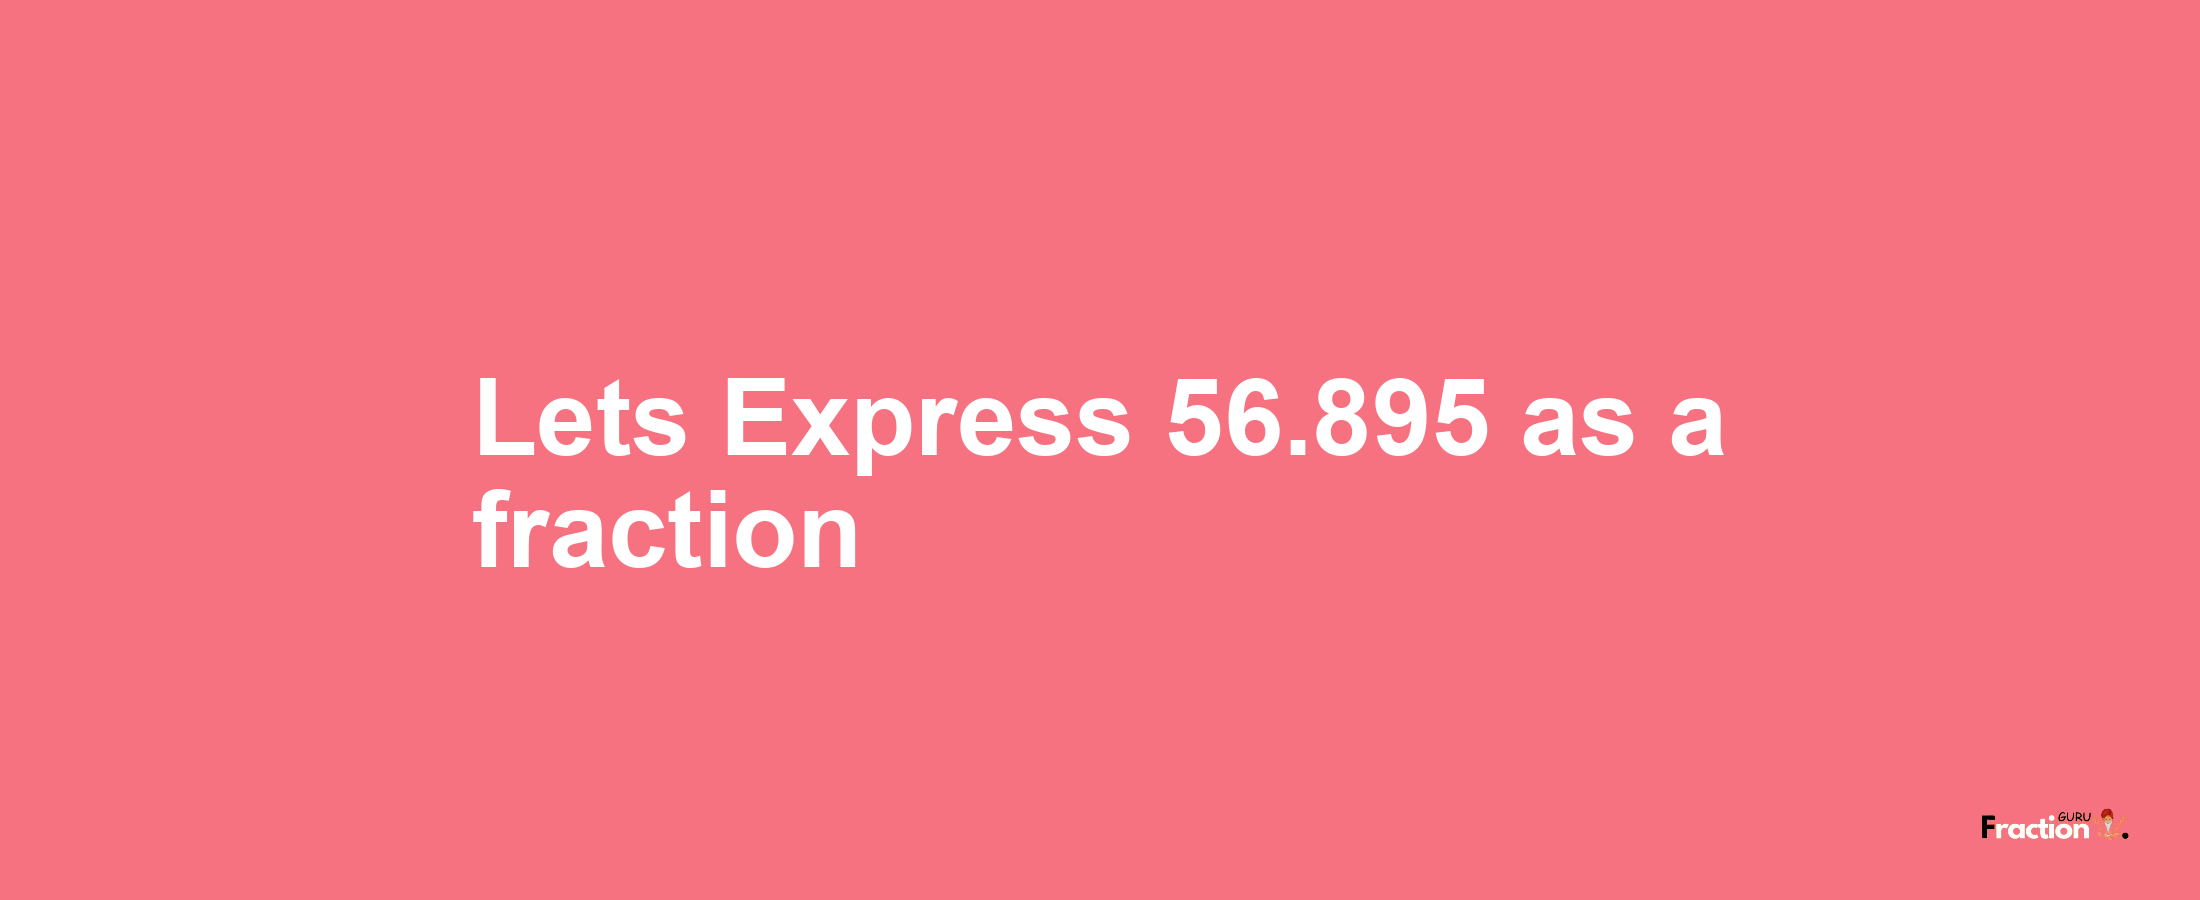 Lets Express 56.895 as afraction